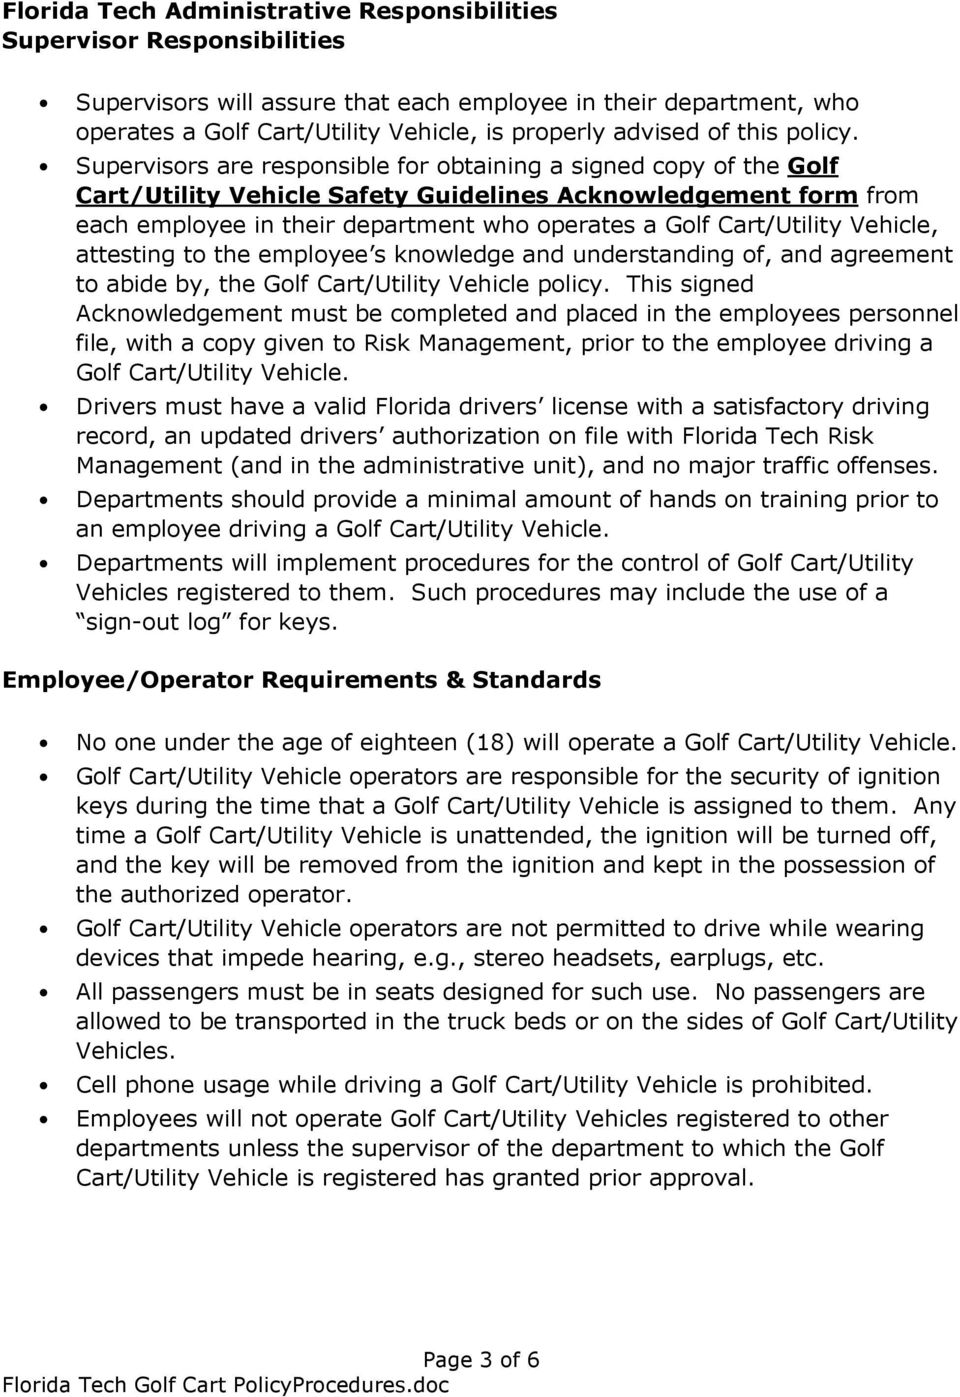 Supervisors are responsible for obtaining a signed copy of the Golf Cart/Utility Vehicle Safety Guidelines Acknowledgement form from each employee in their department who operates a Golf Cart/Utility